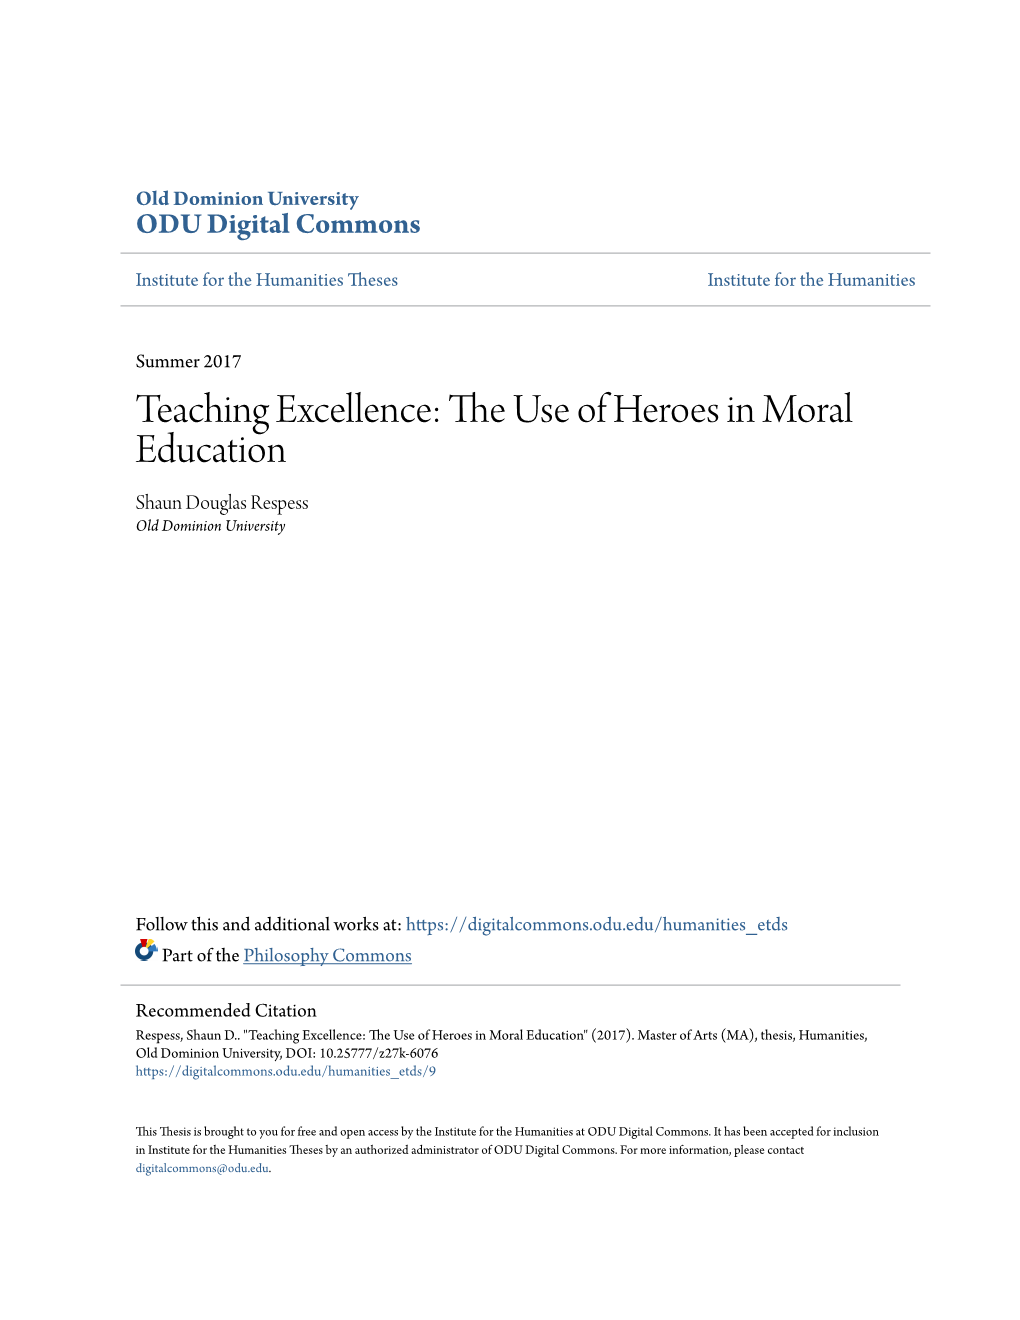 Teaching Excellence: the Use of Heroes in Moral Education